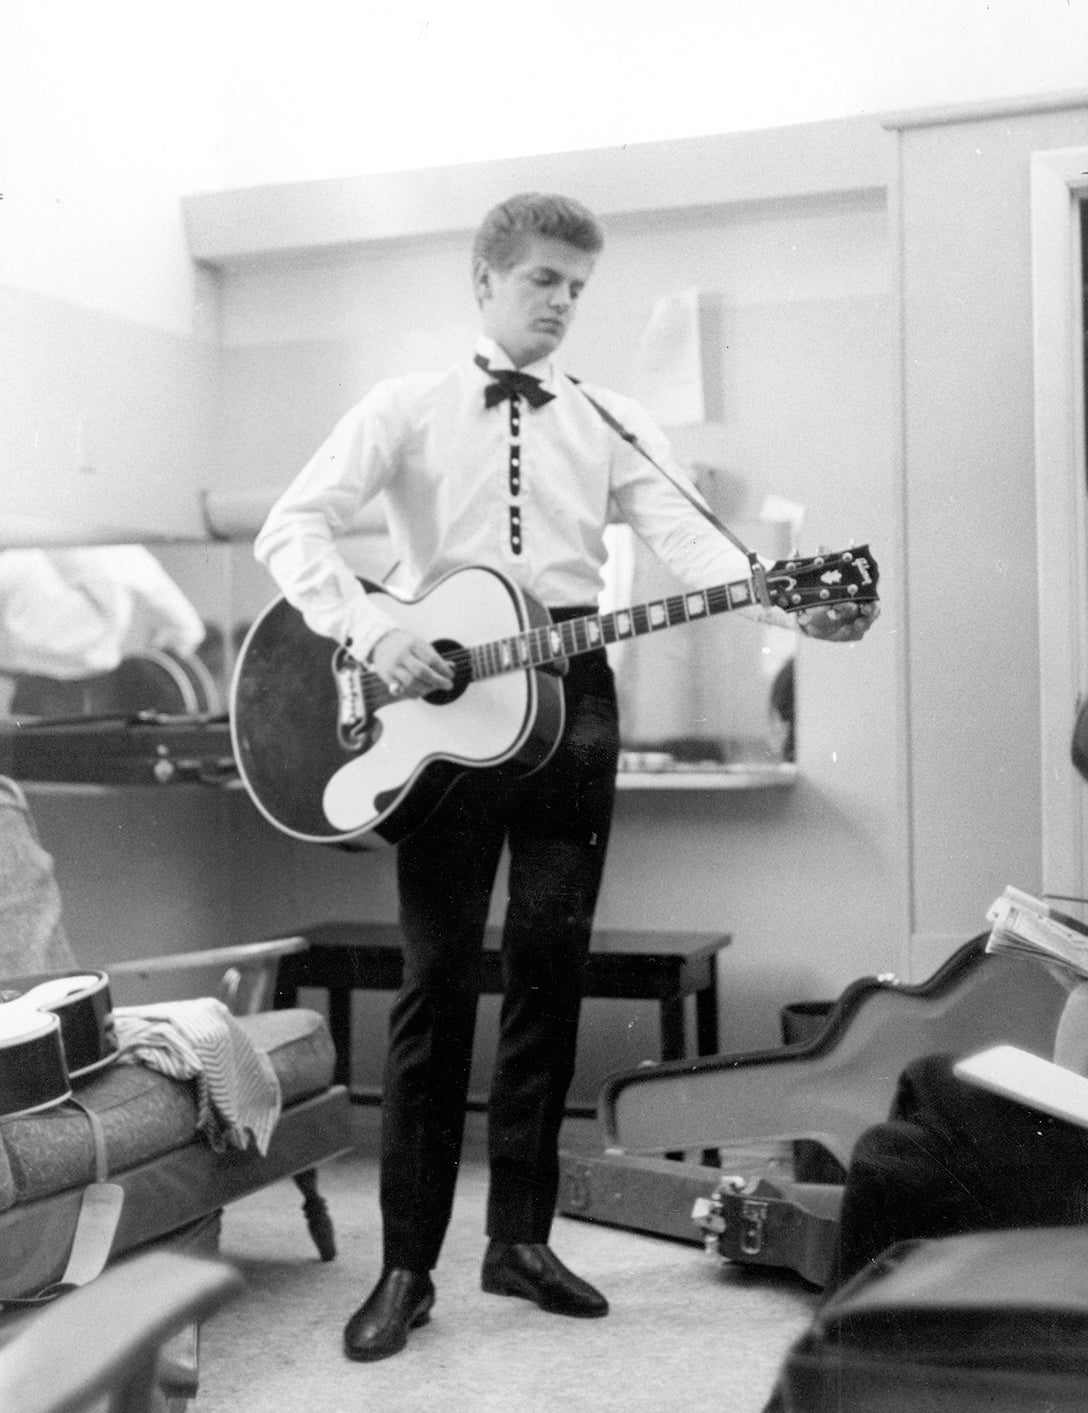 black-and-white photograph of Phil Everly of the Everly Brothers